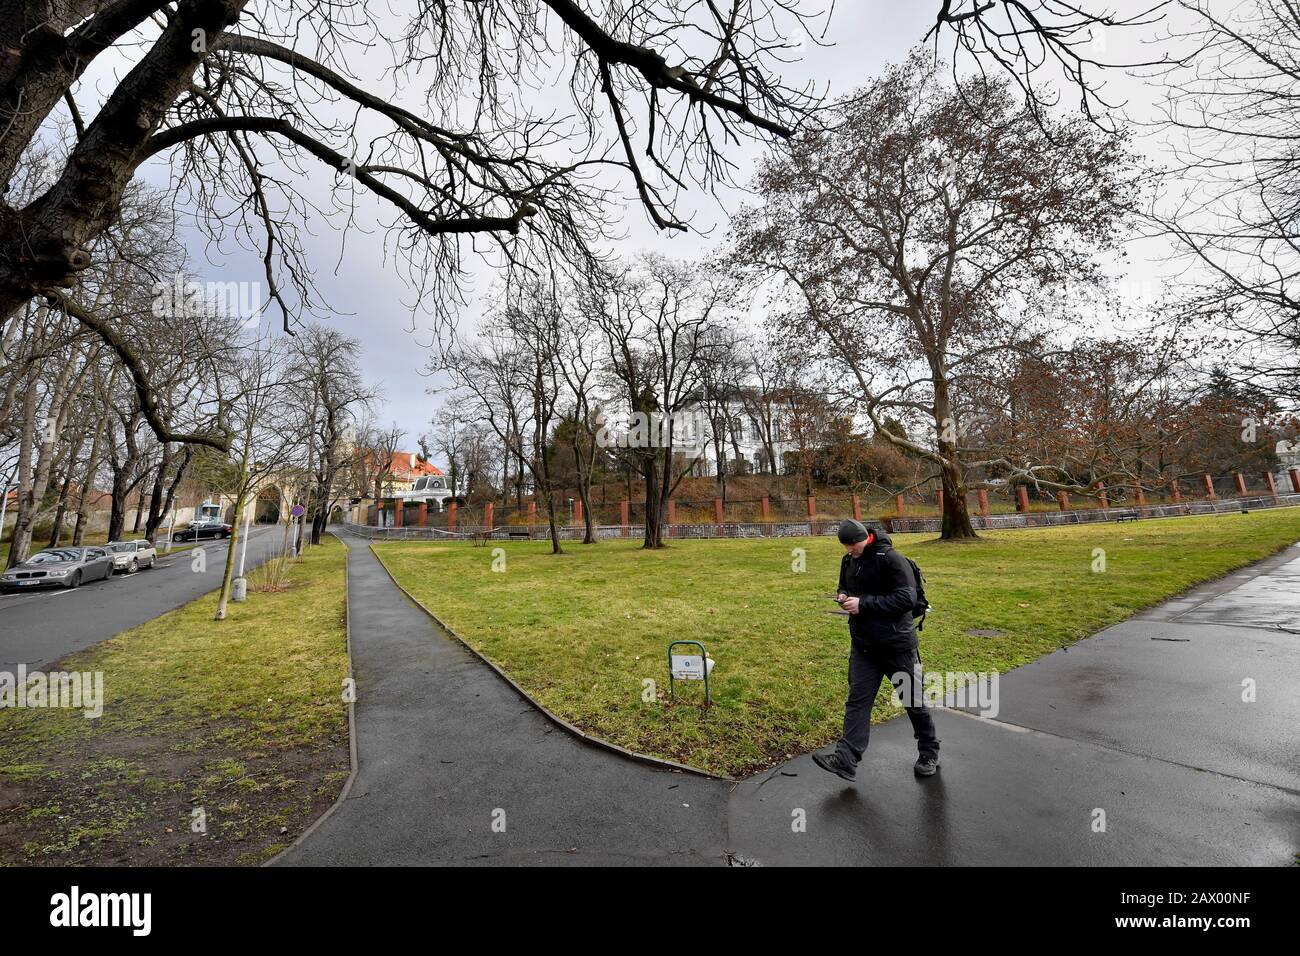 Prague, Czech Republic. 10th Feb, 2020. The Pod Kastany Square (Chestnut Trees Square) is seen in Prague, Czech Republic, on February 10, 2020. The square, where the Russian embassy is situated, will probably be renamed after the murdered Russian opposition leader Boris Nemtsov, Mayor Zdenek Hrib said on February 7. Credit: Vit Simanek/CTK Photo/Alamy Live News Stock Photo